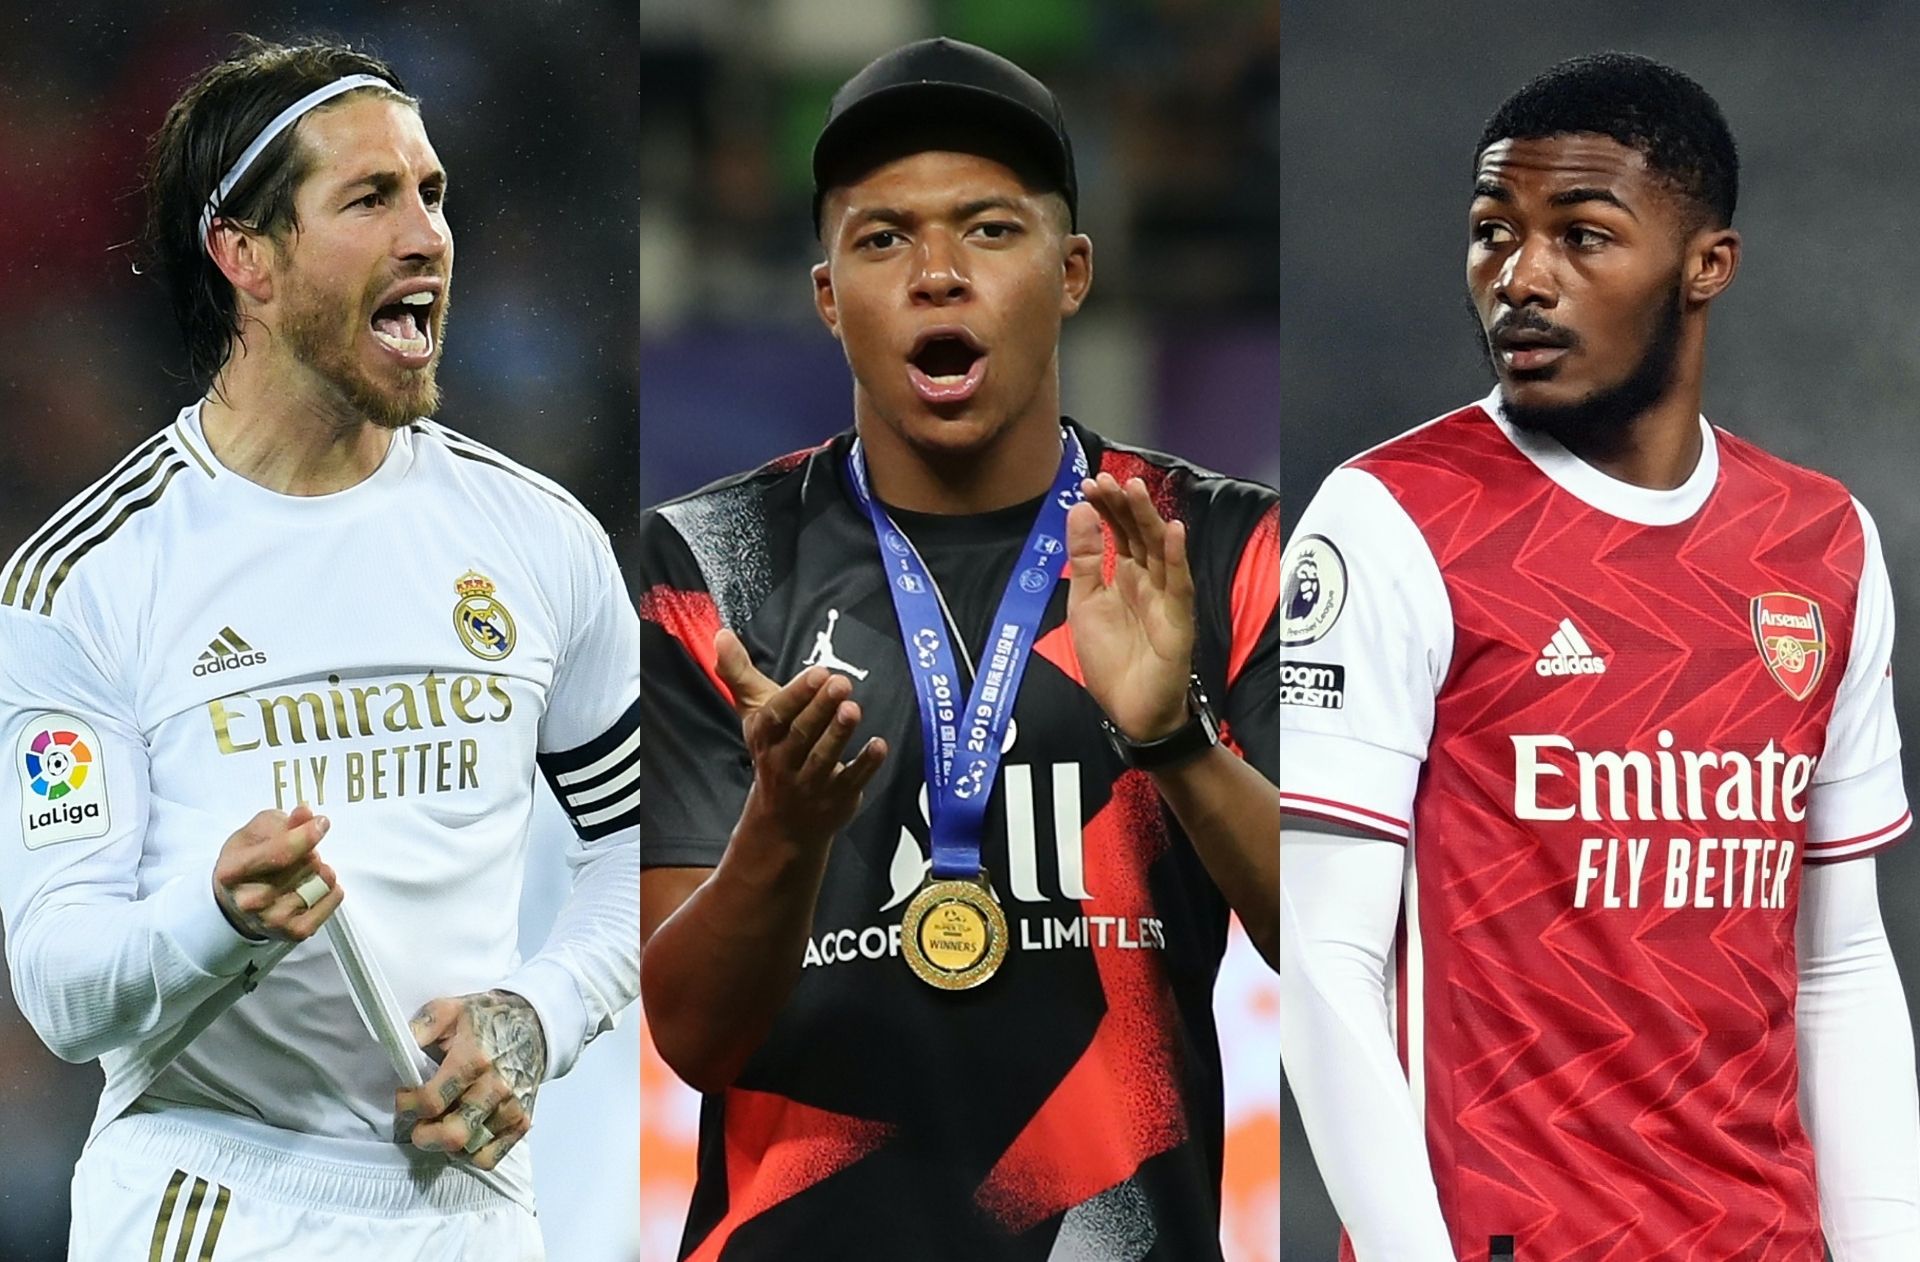 Saturday's transfer rumors - Real Madrid to trade 3 players for Mbappe?